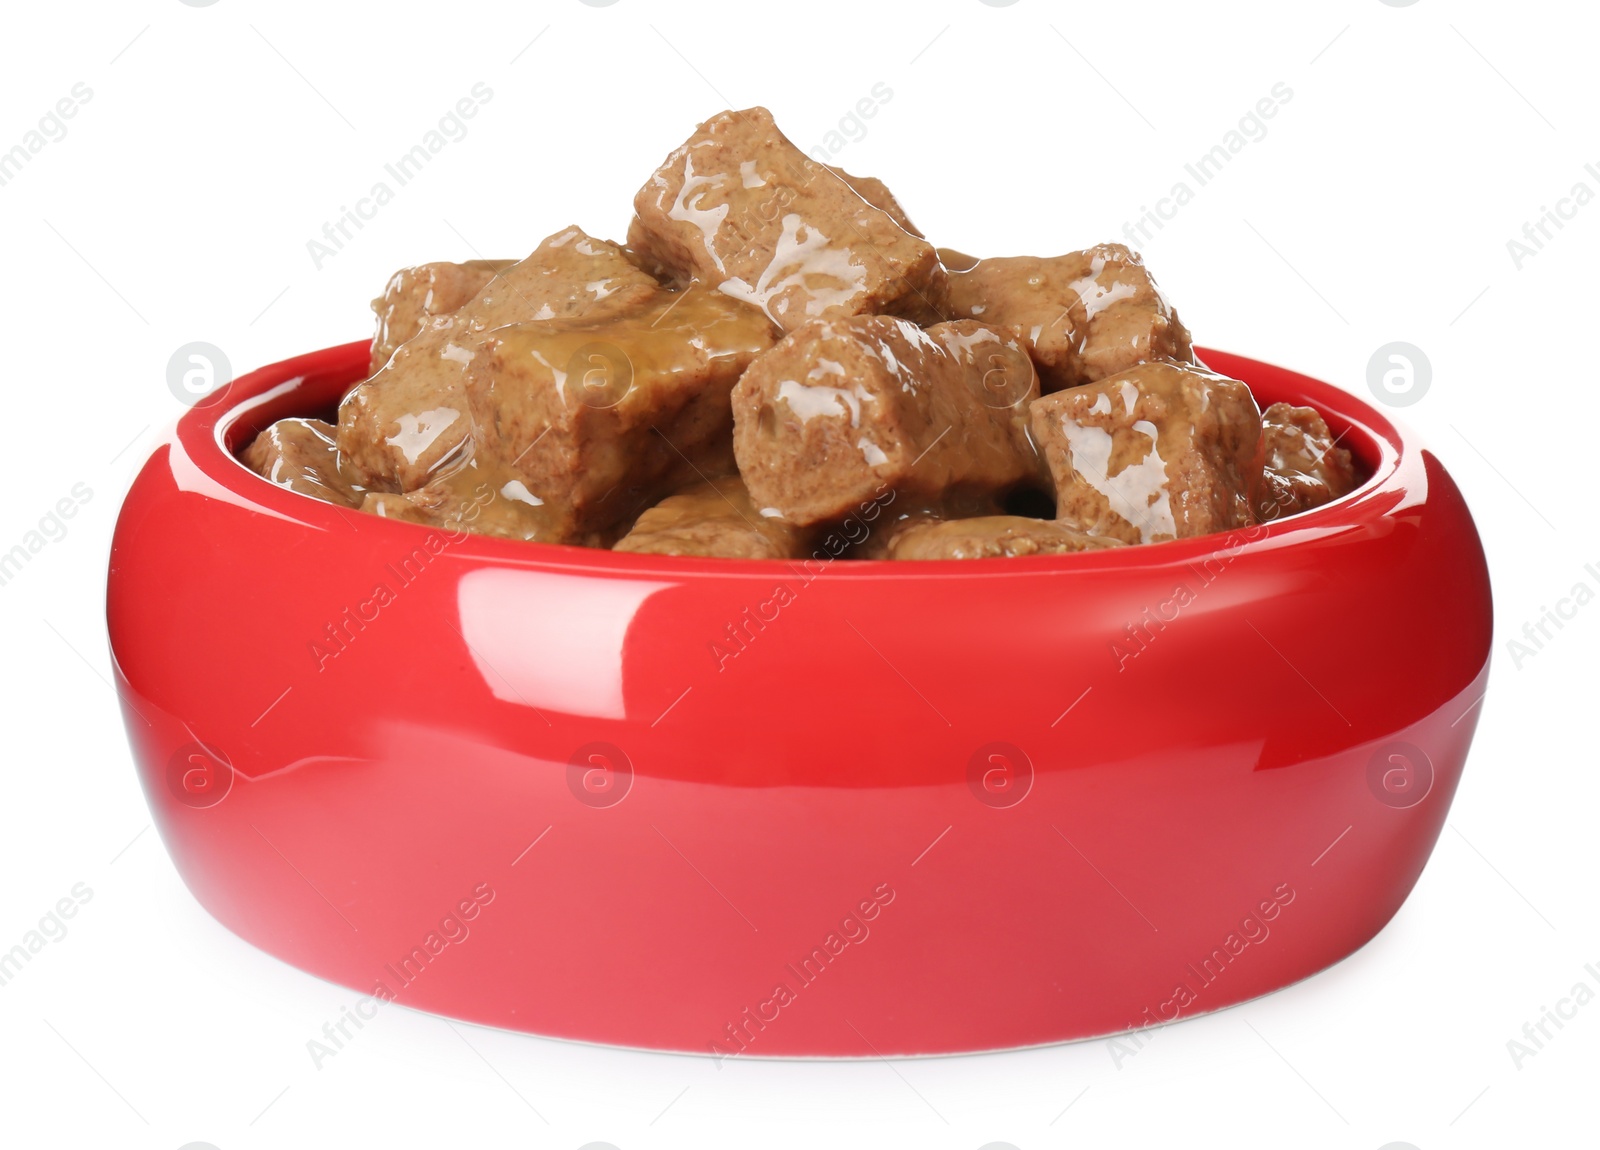 Photo of Wet pet food in feeding bowl isolated on white